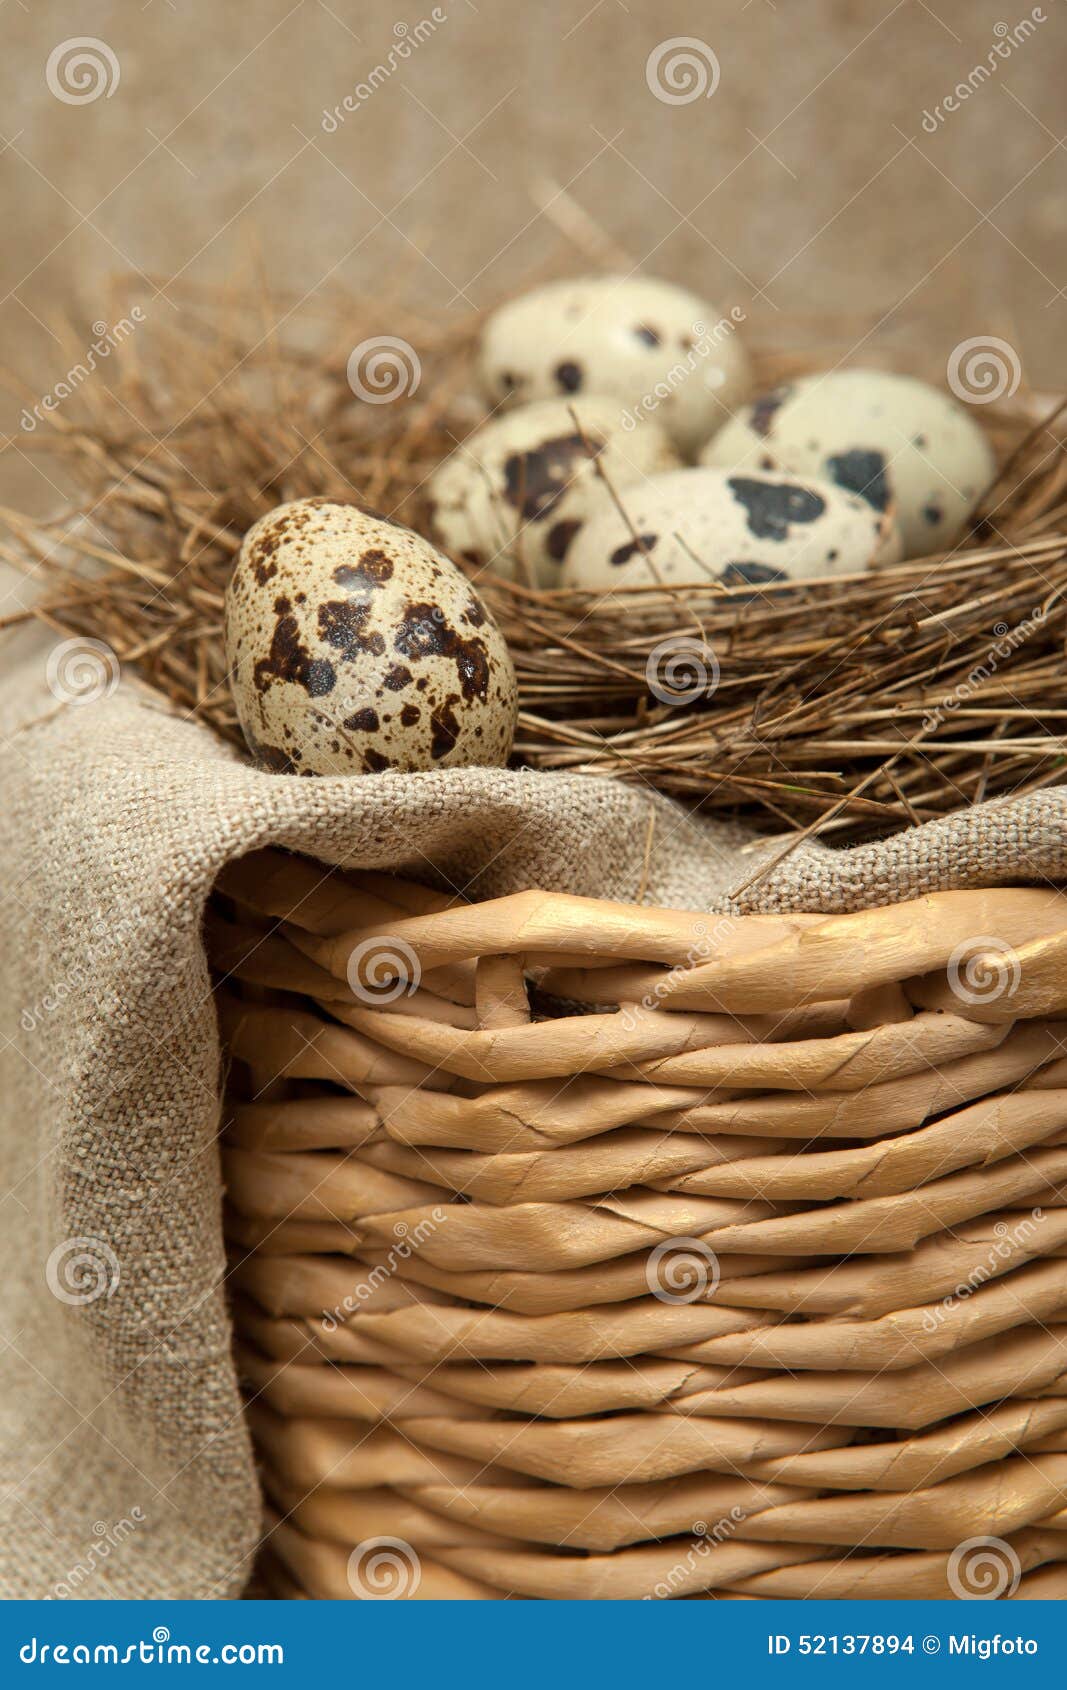 Bird s nest of straw with quail eggs on linen fabric.